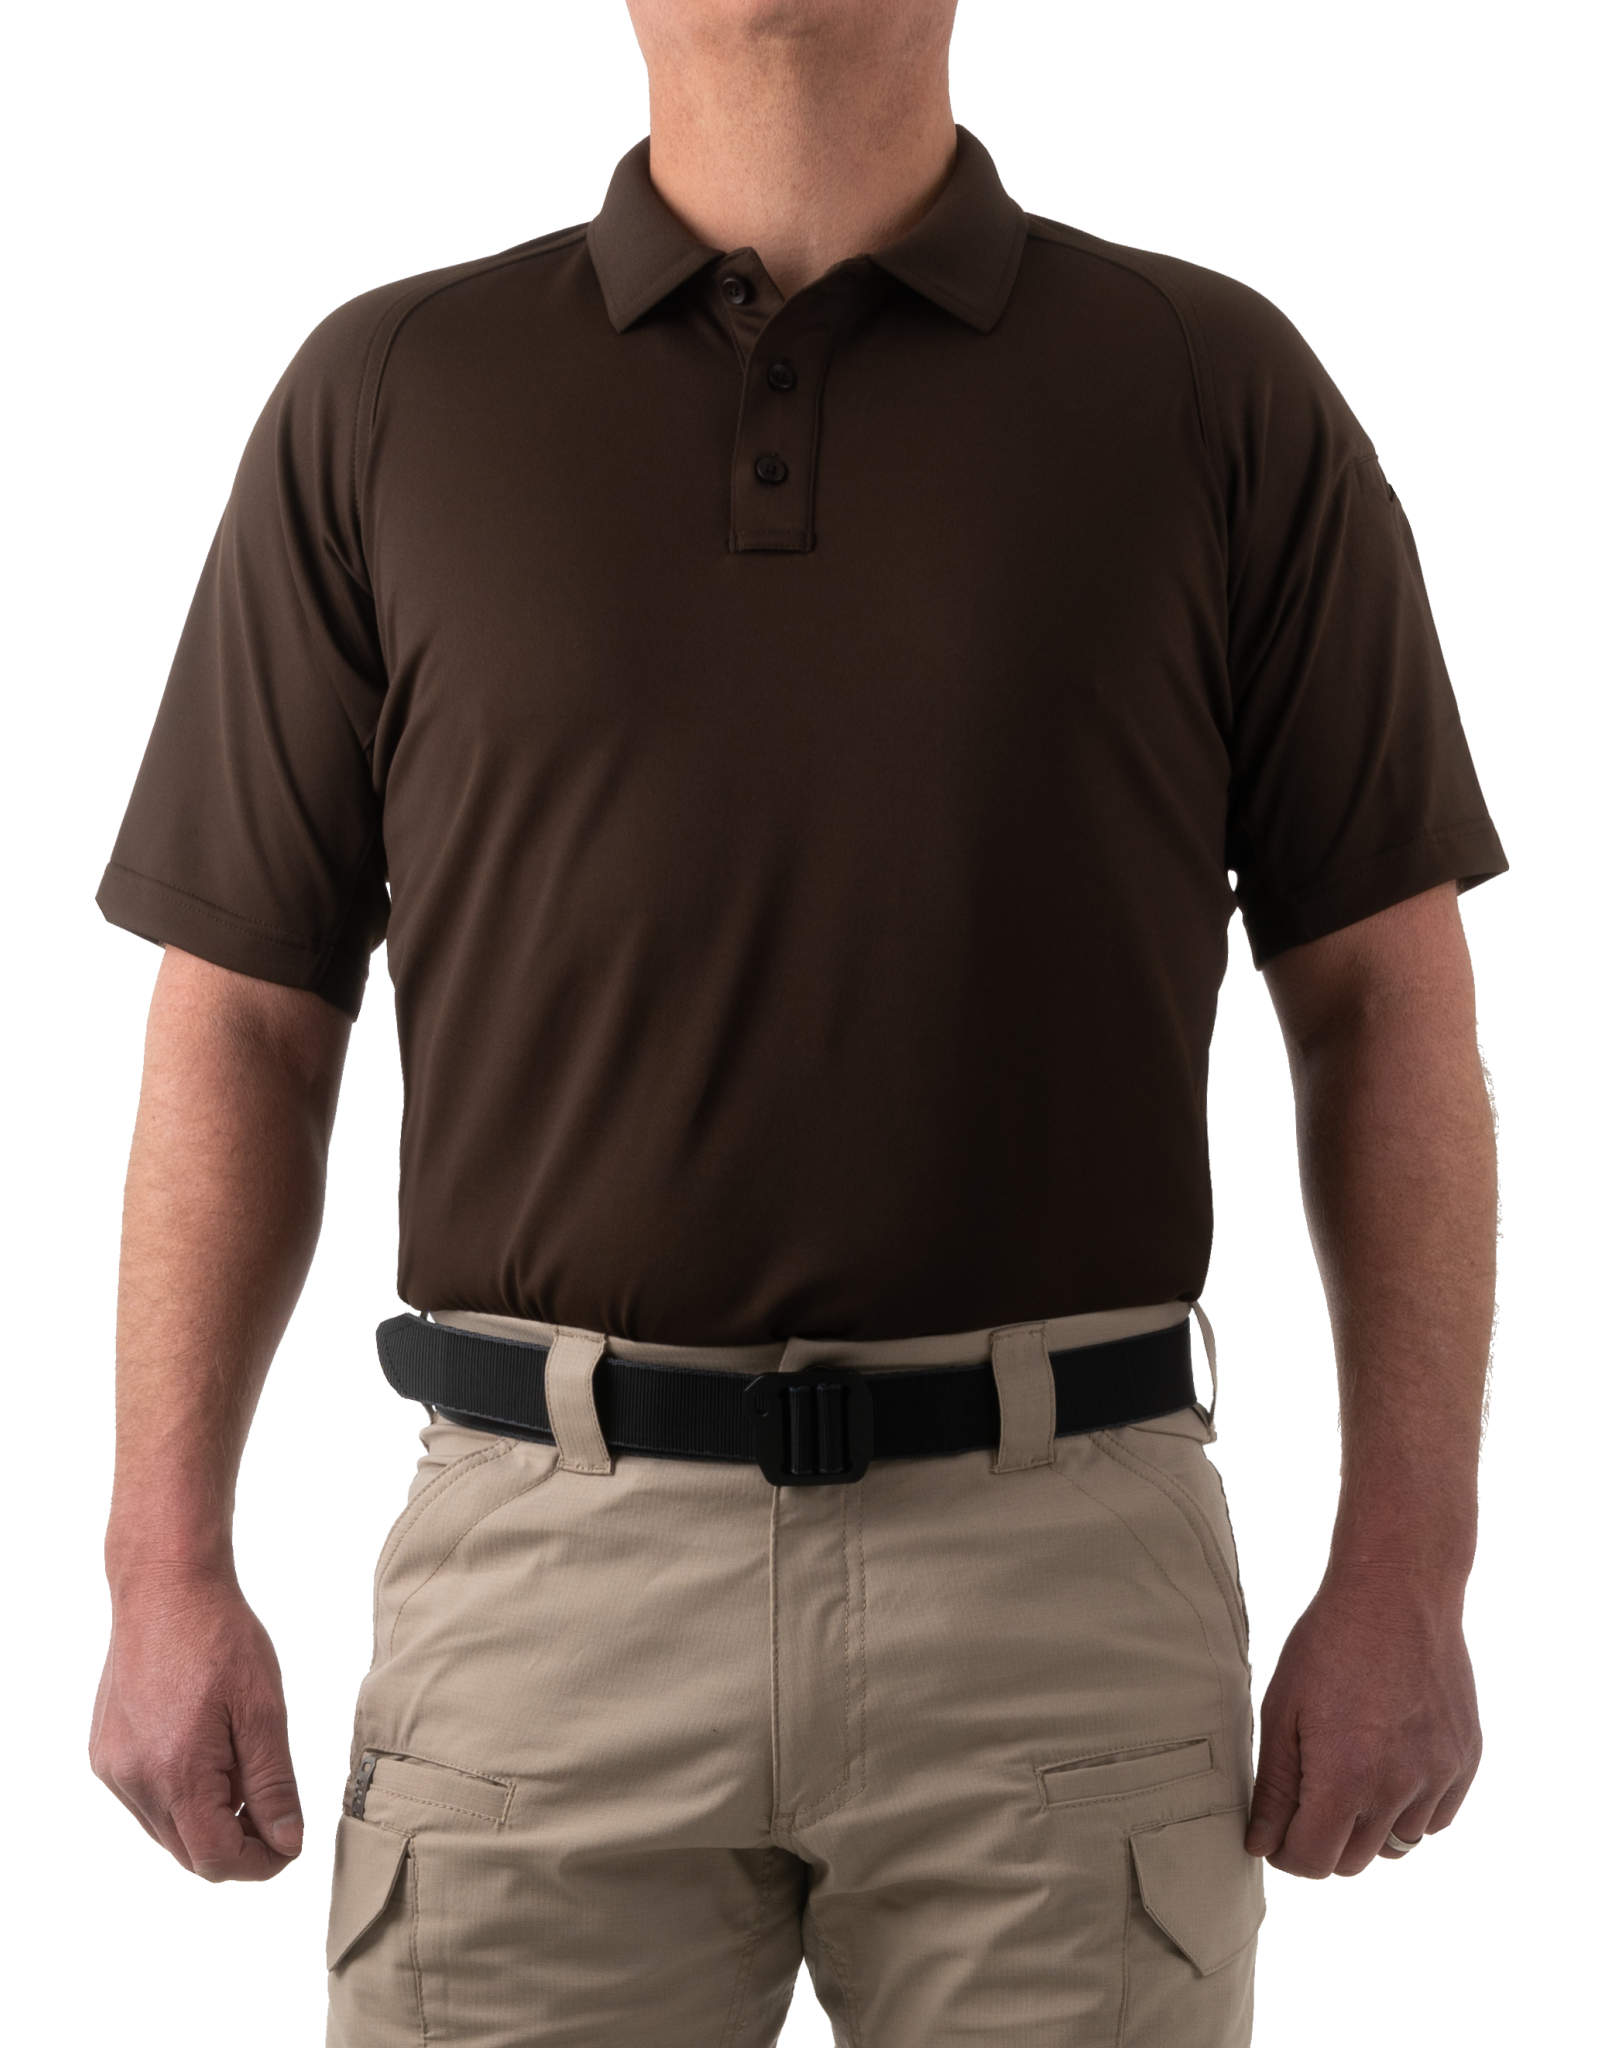 First Tactical Men's Performance Polo Short Sleeve